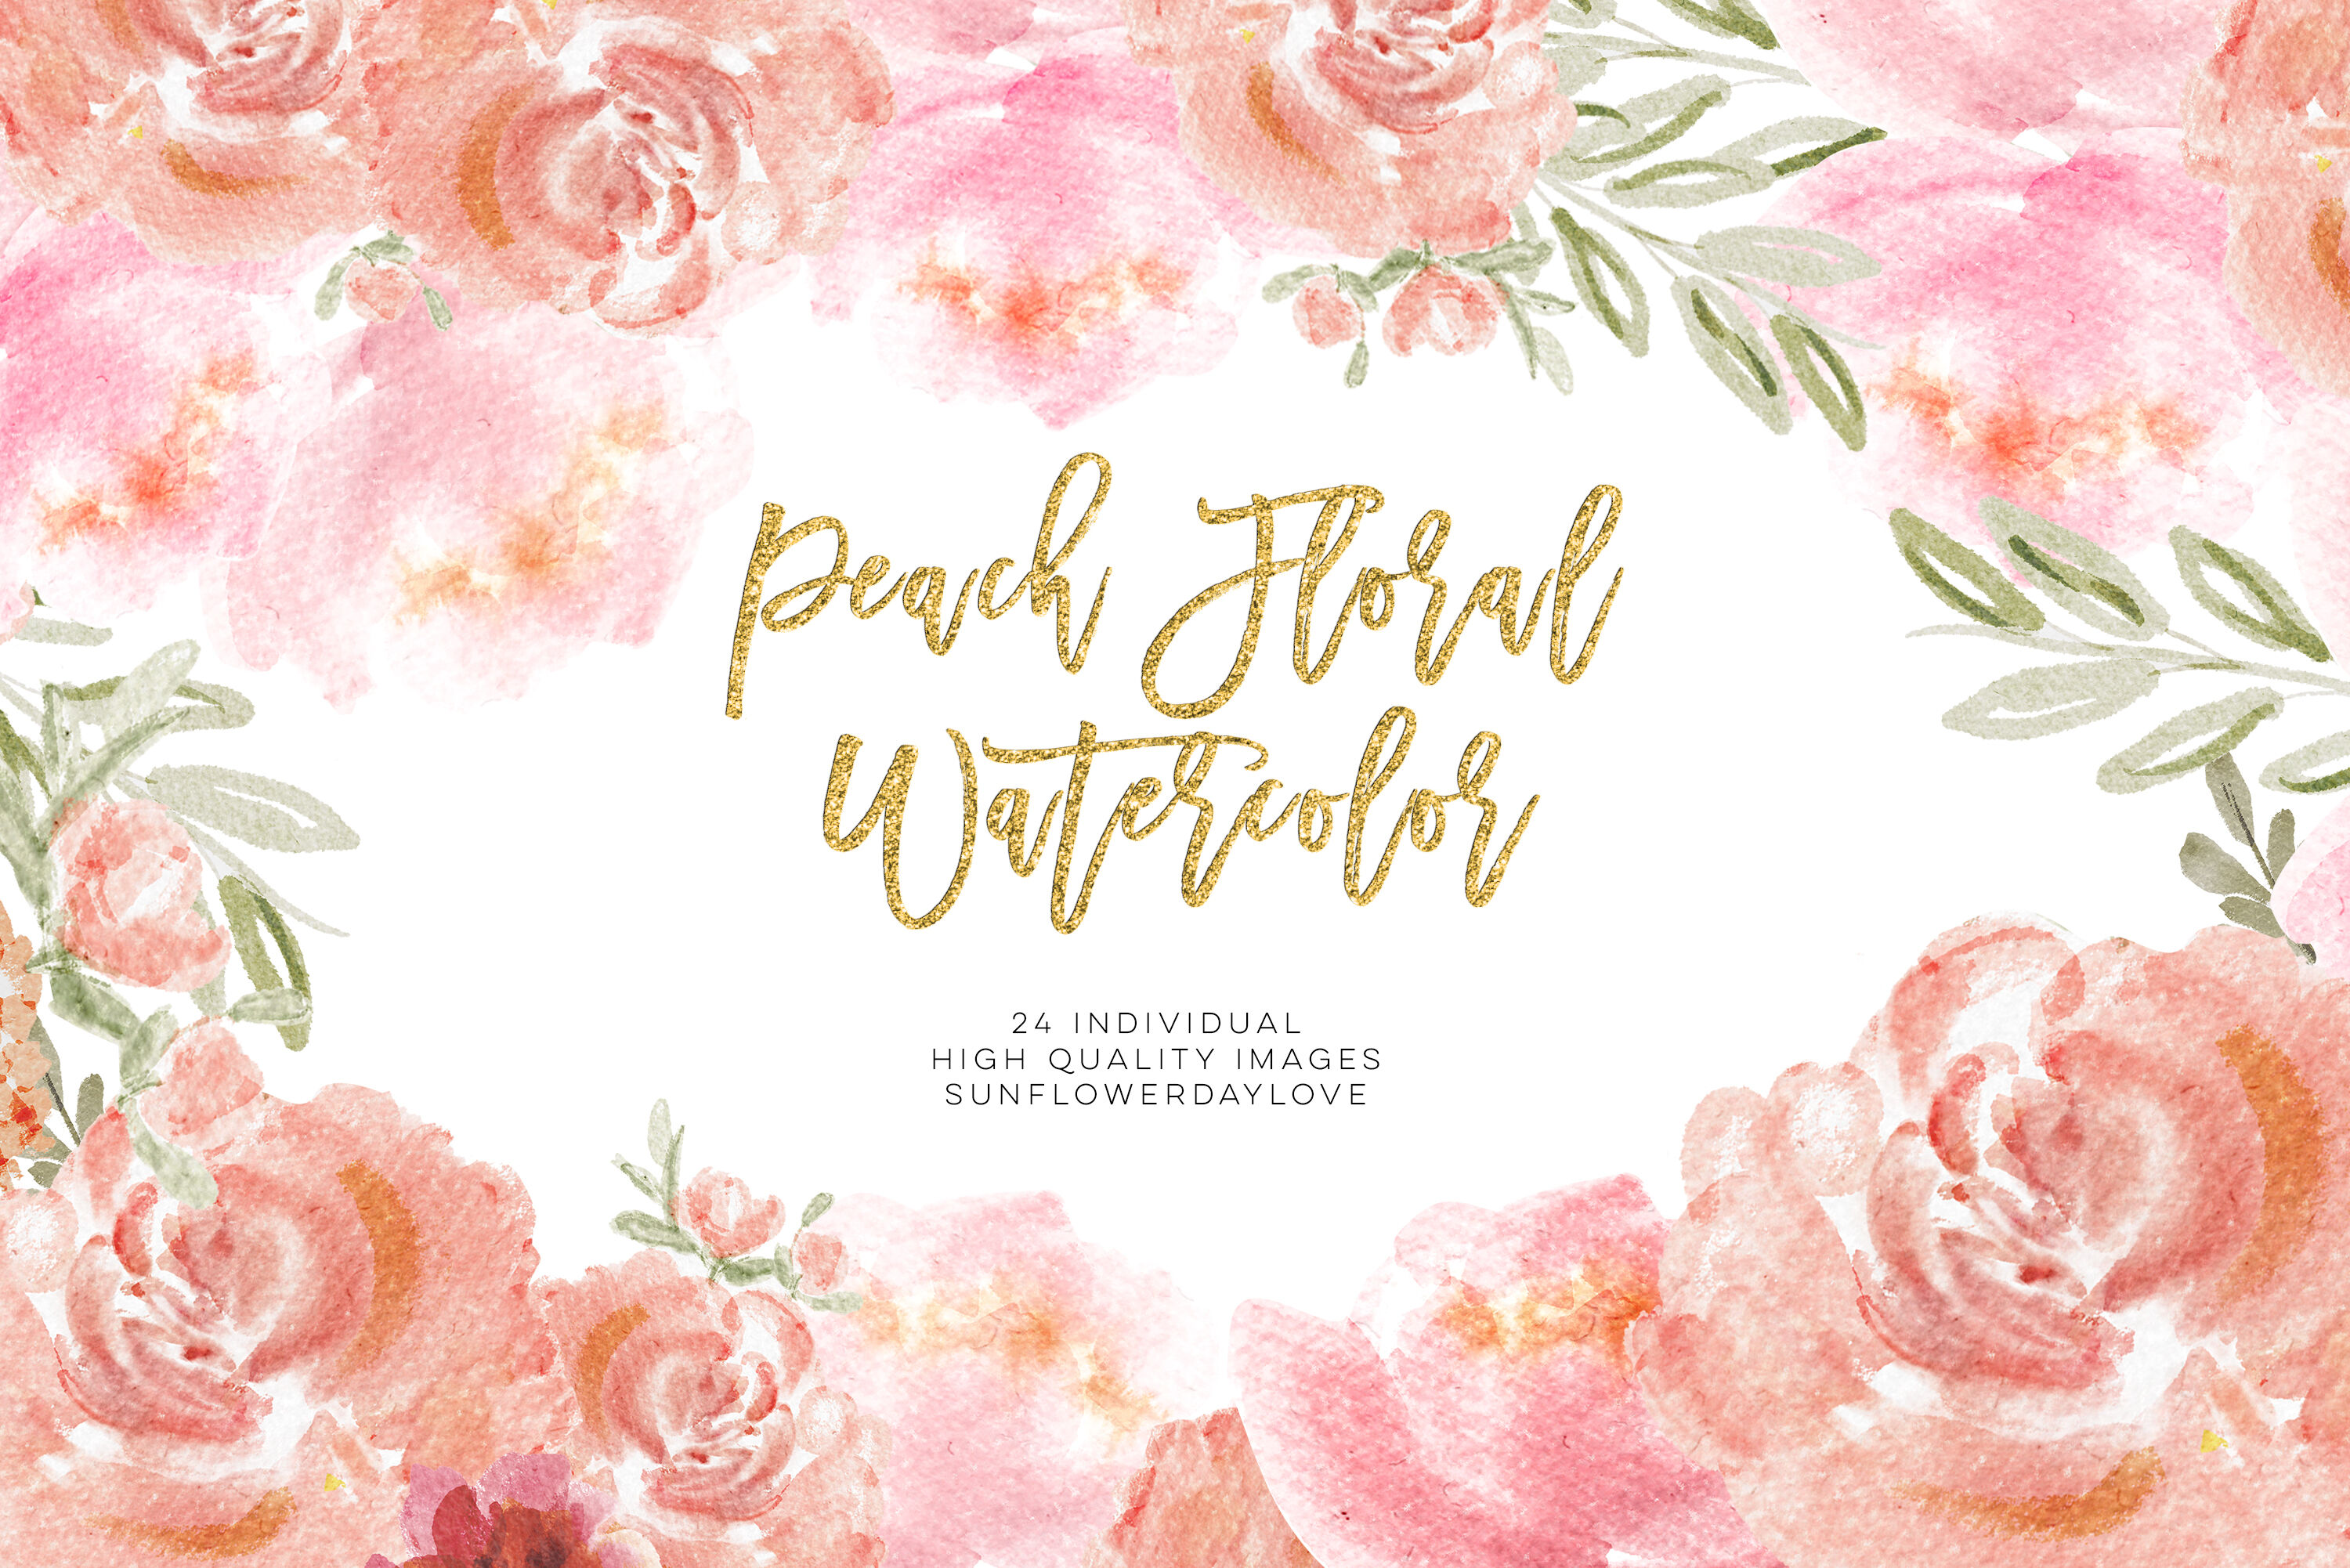 Download Peach Floral Watercolor Clip Art Blush Pink Floral Clip Art By Sunflower Day Love Thehungryjpeg Com